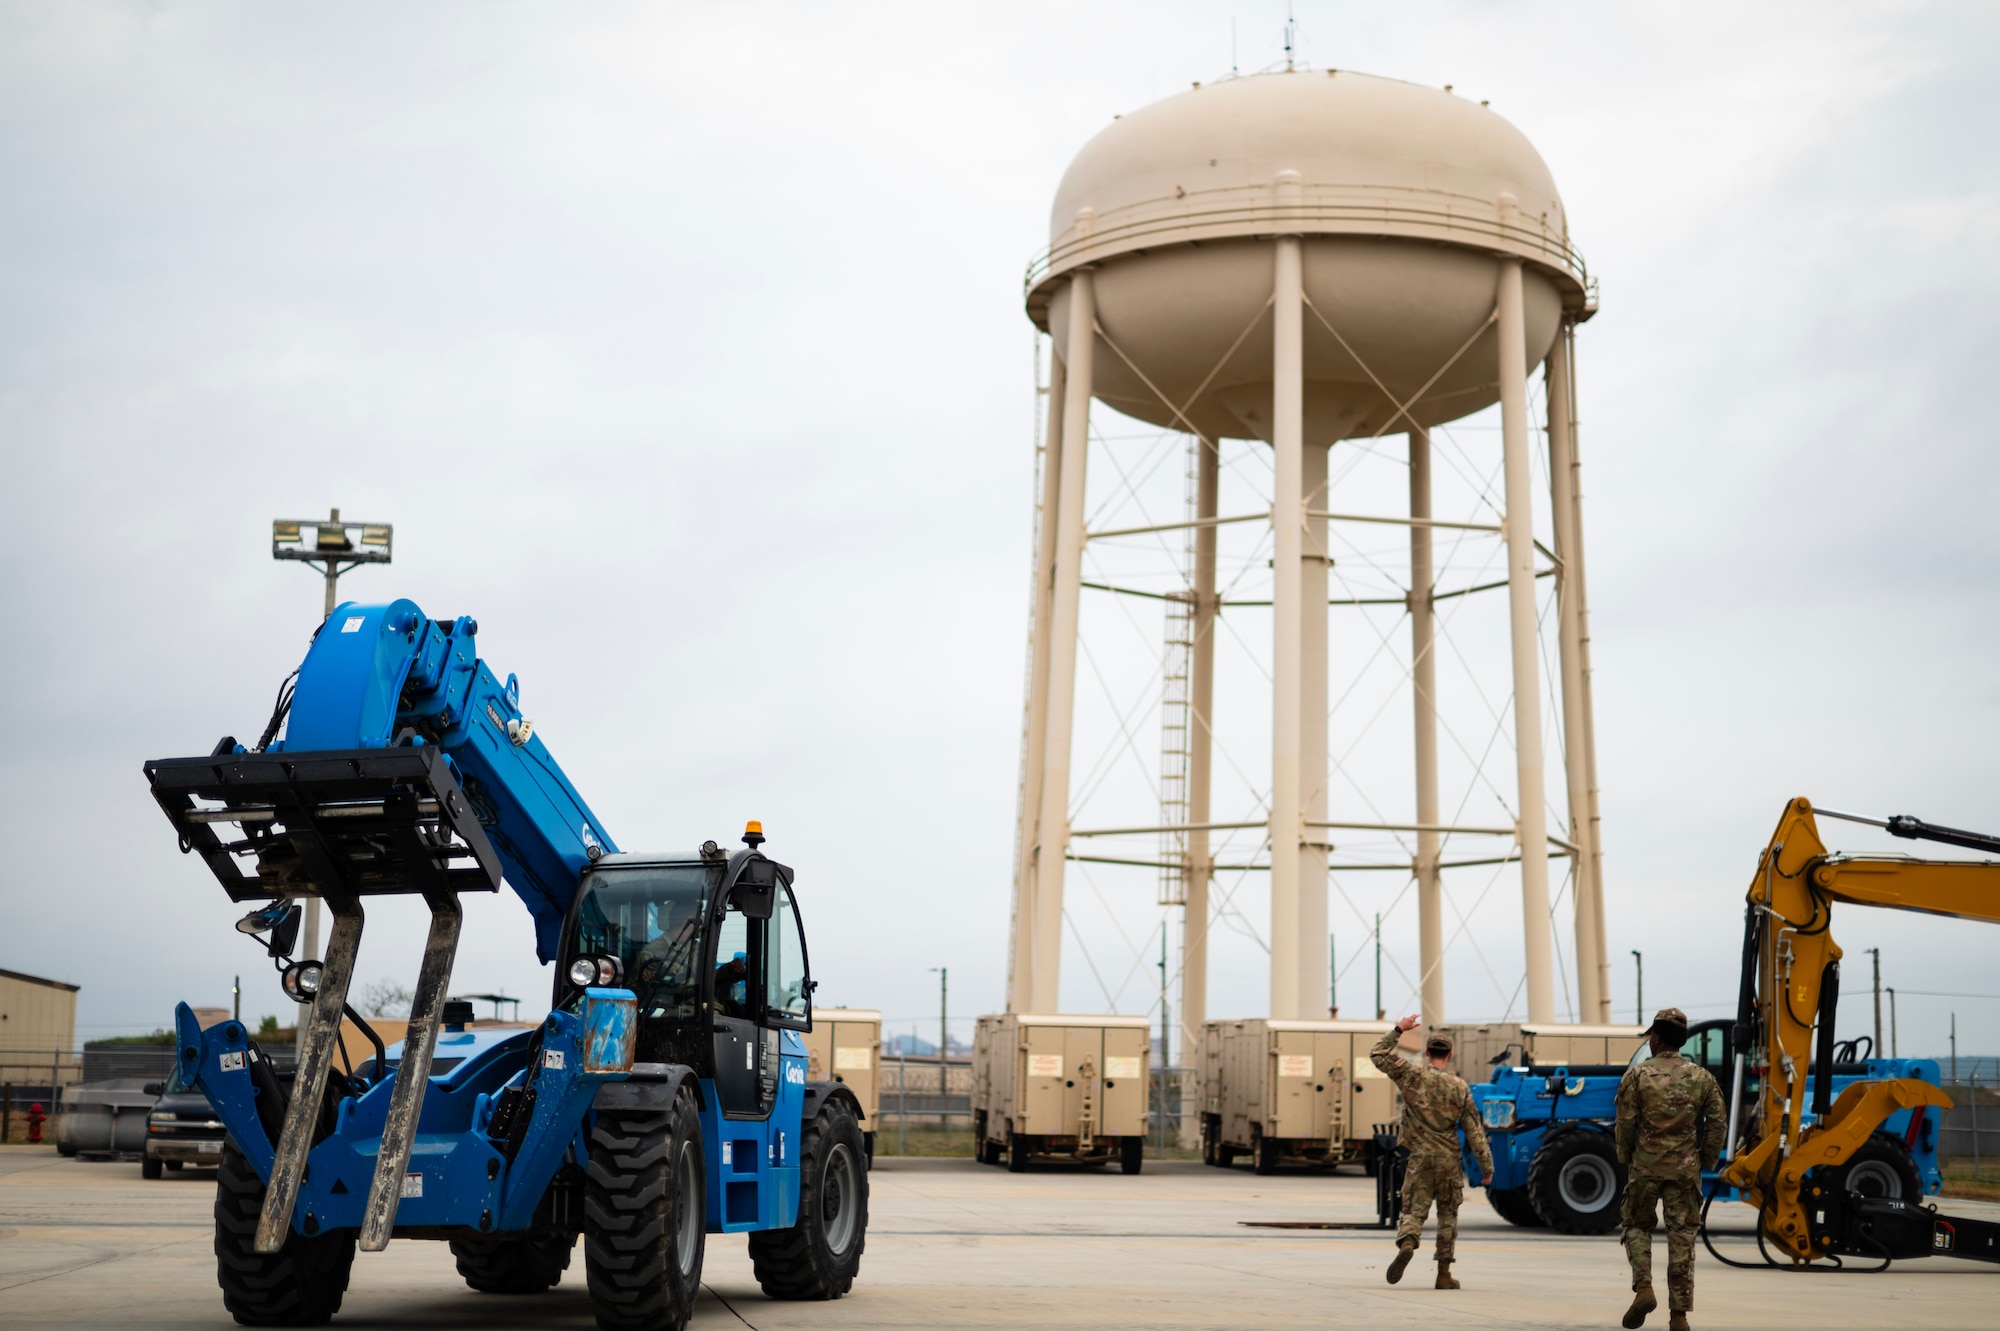 Airmen operate a telehandler during a Prime Base Engineer Emergency Force or “Prime BEEF” training at Kunsan Air Base,